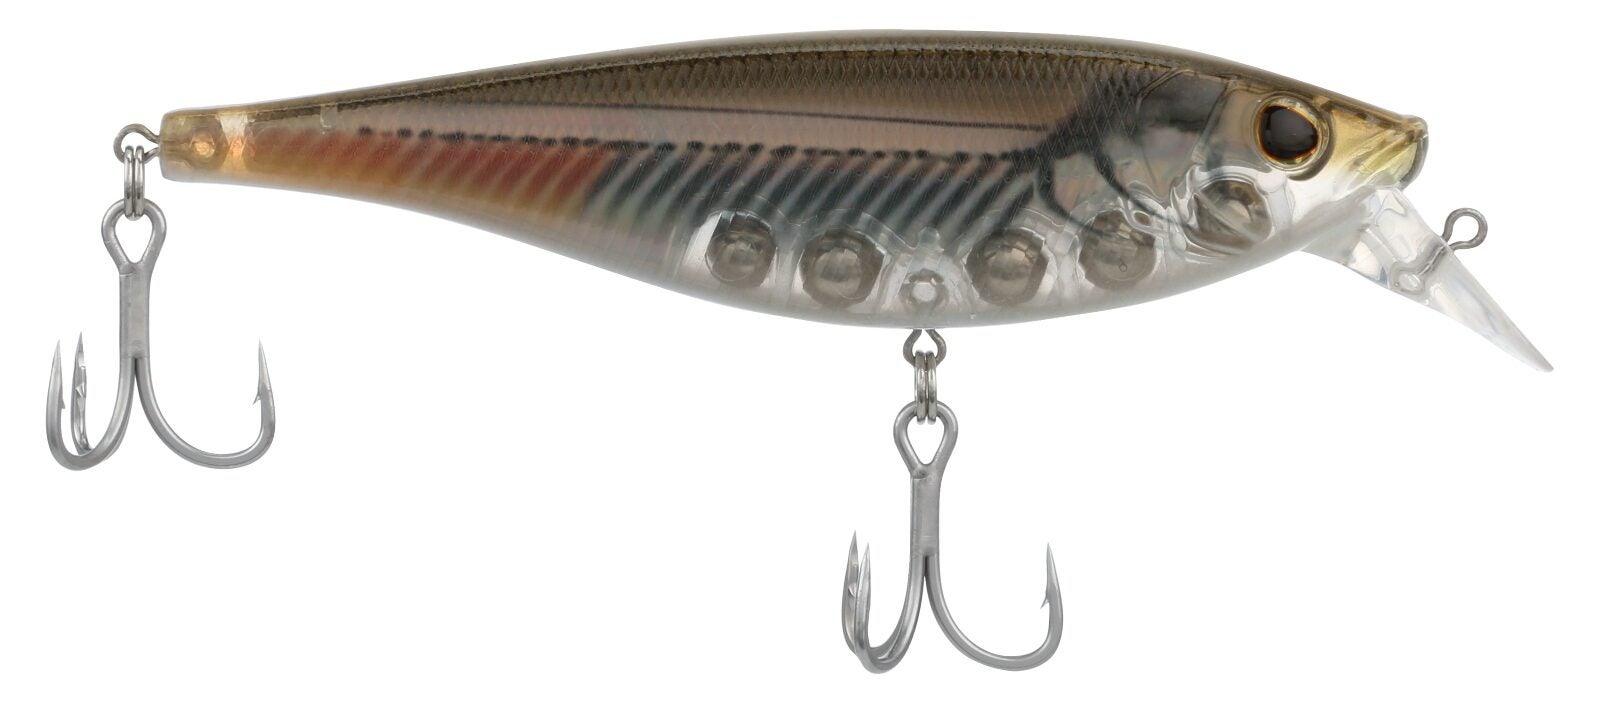 Berkley Releases New Saltwater Hard Baits and Adds Sizes